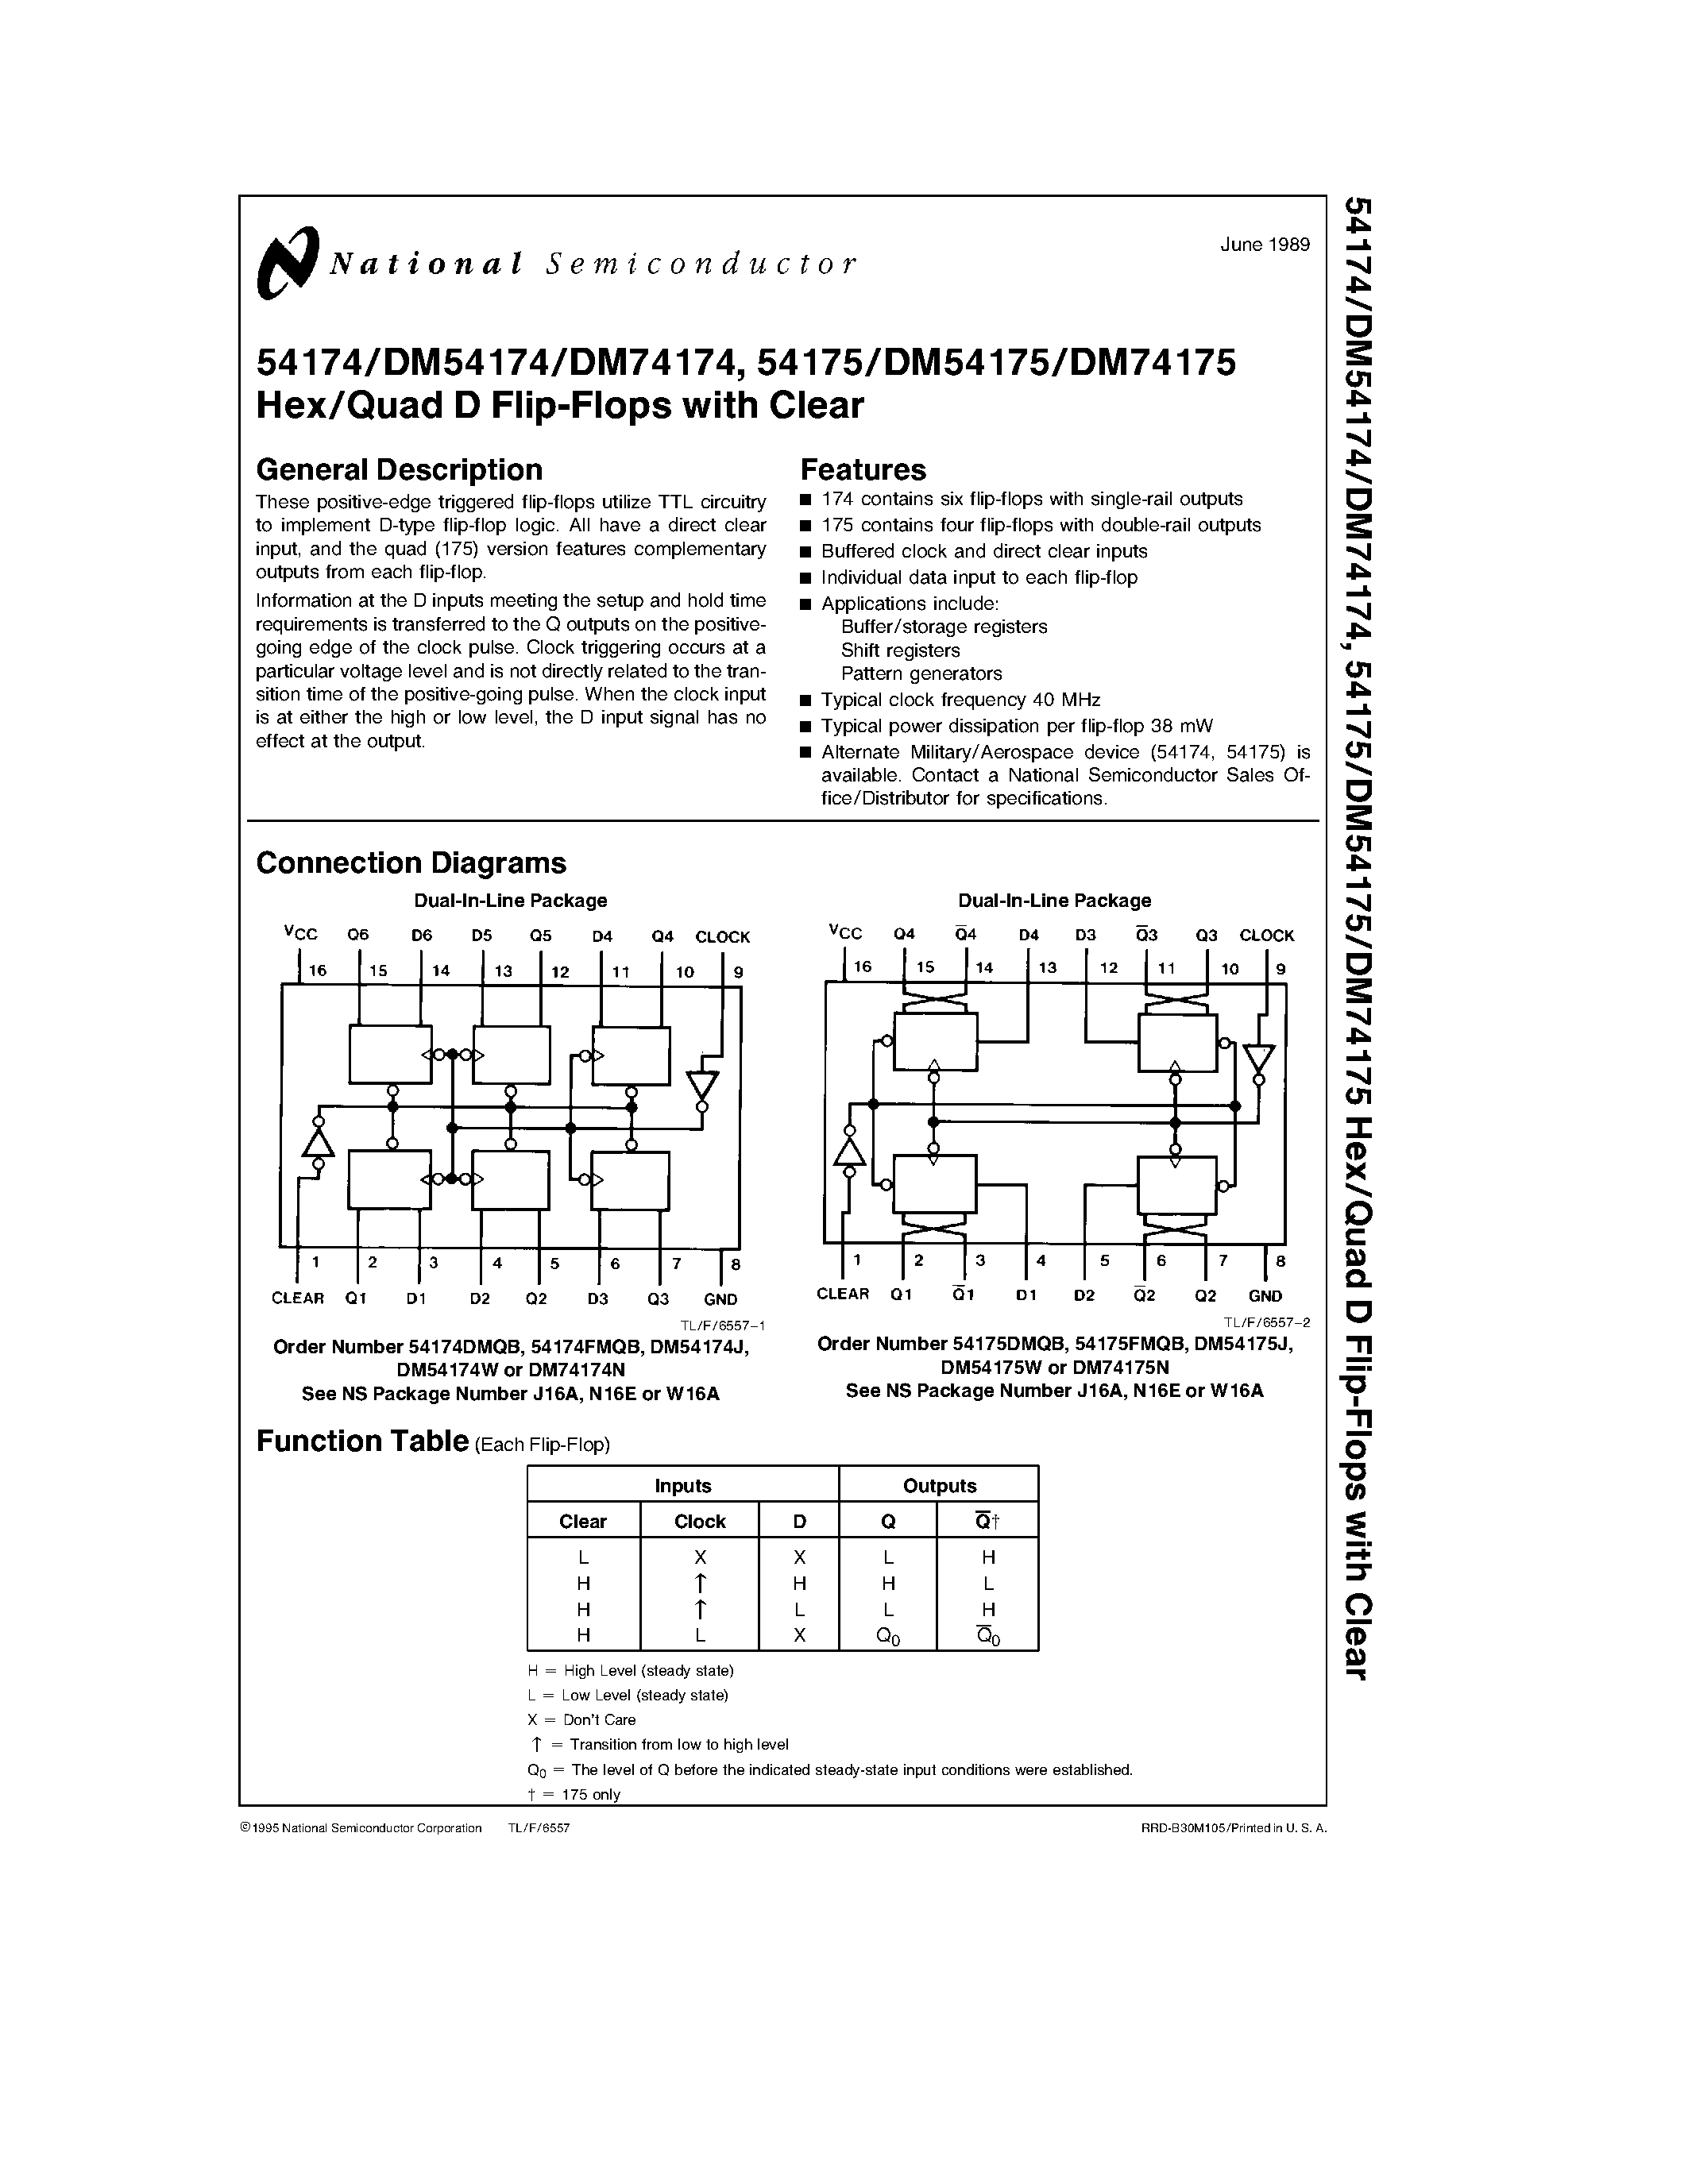 Datasheet 54174 - Hex/Quad D Flip-Flops with Clear page 1